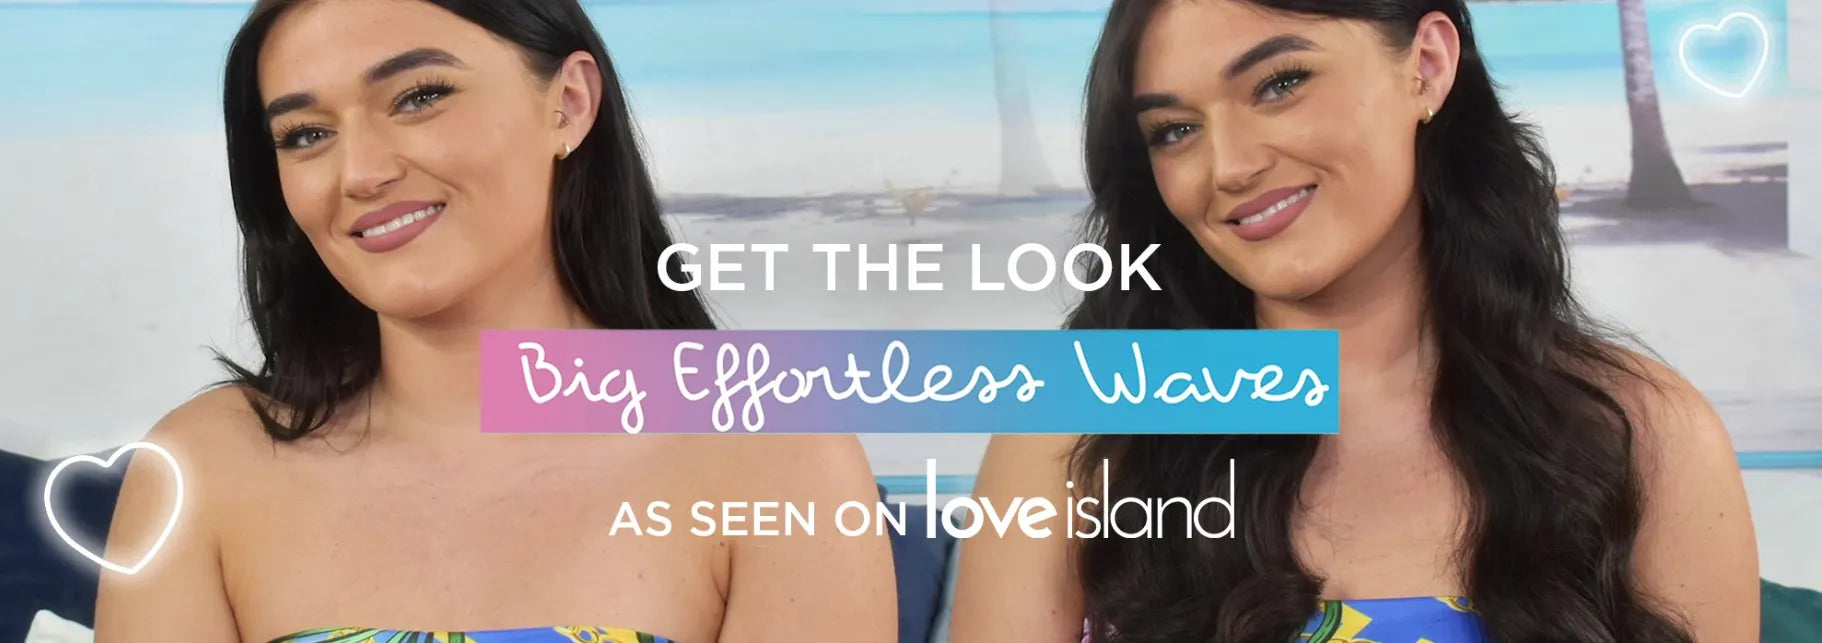 A before and after image comparison showing 'big effortless waves as seen on love island'.